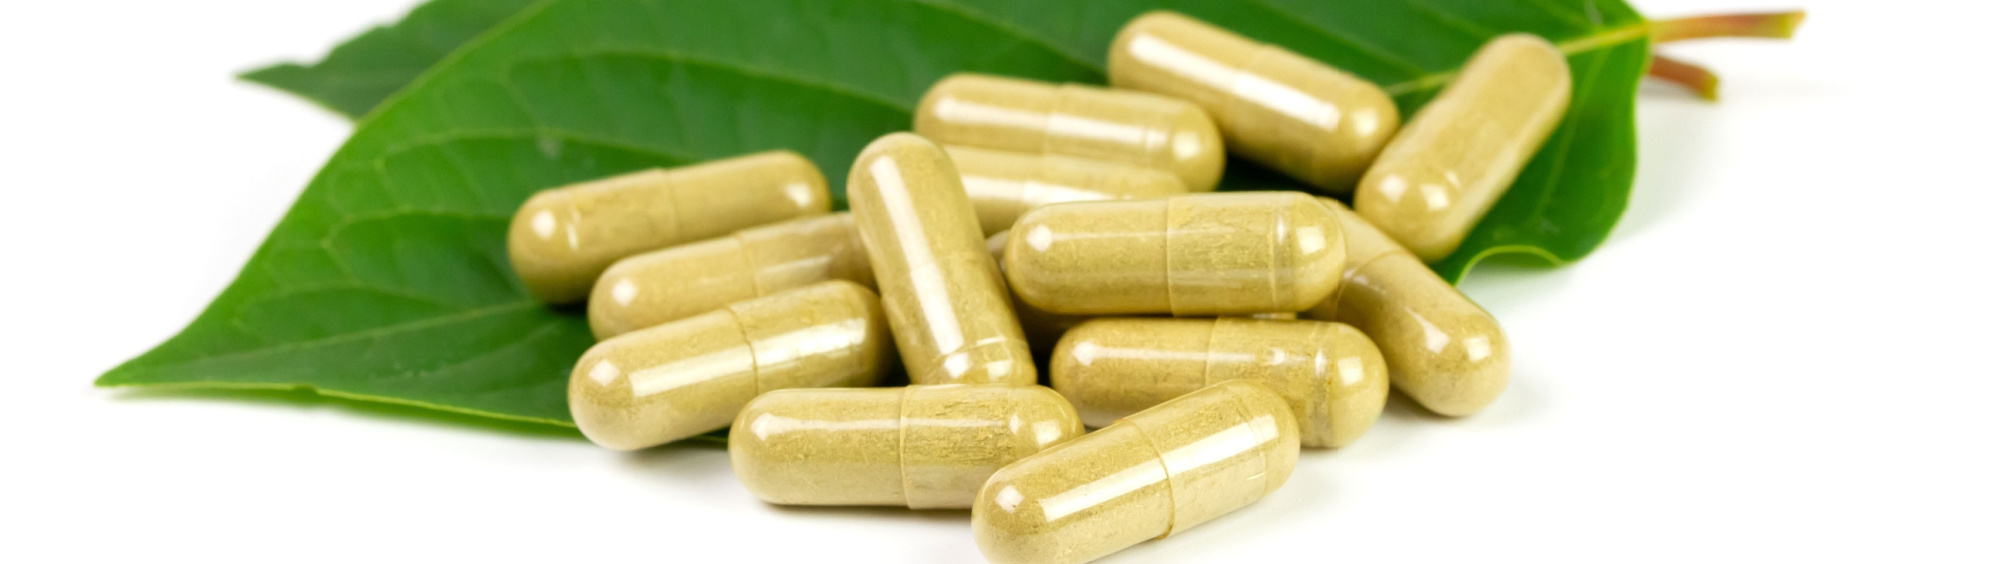 image of how many should you ingest when taking kratom capsules